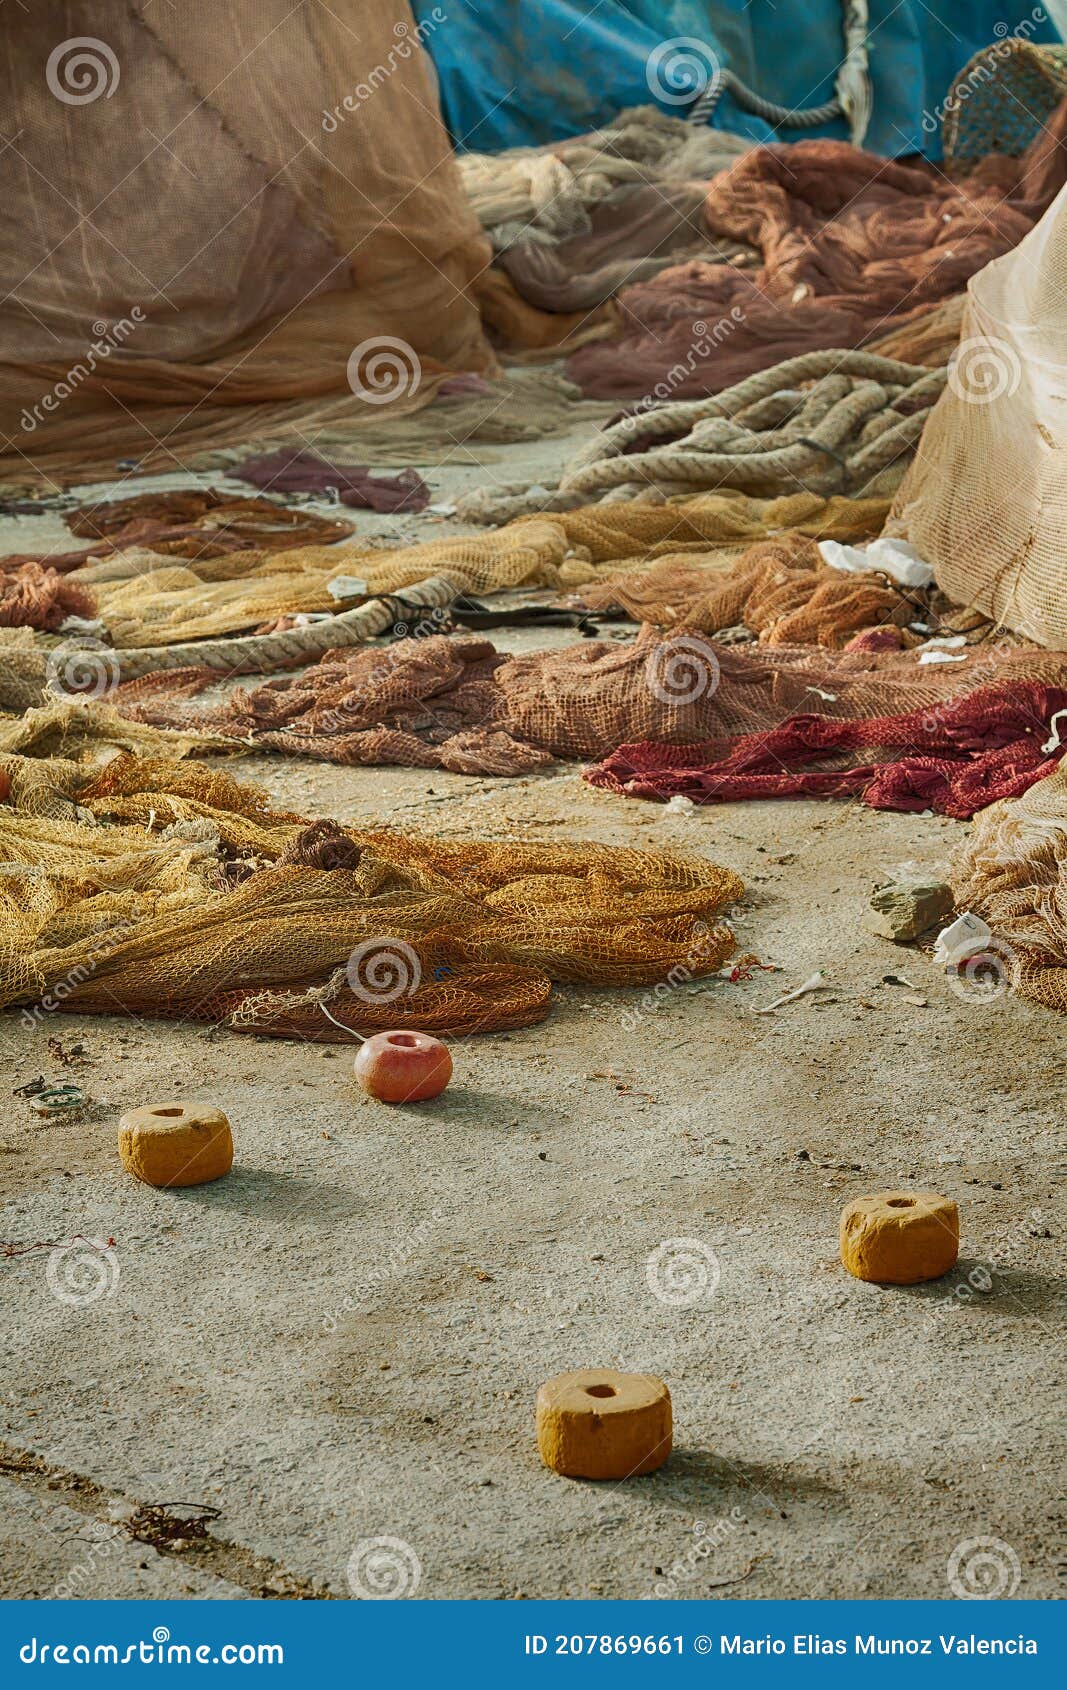 https://thumbs.dreamstime.com/z/closeup-pile-fishing-nets-white-rope-red-cork-floats-port-coast-andalucia-spain-207869661.jpg